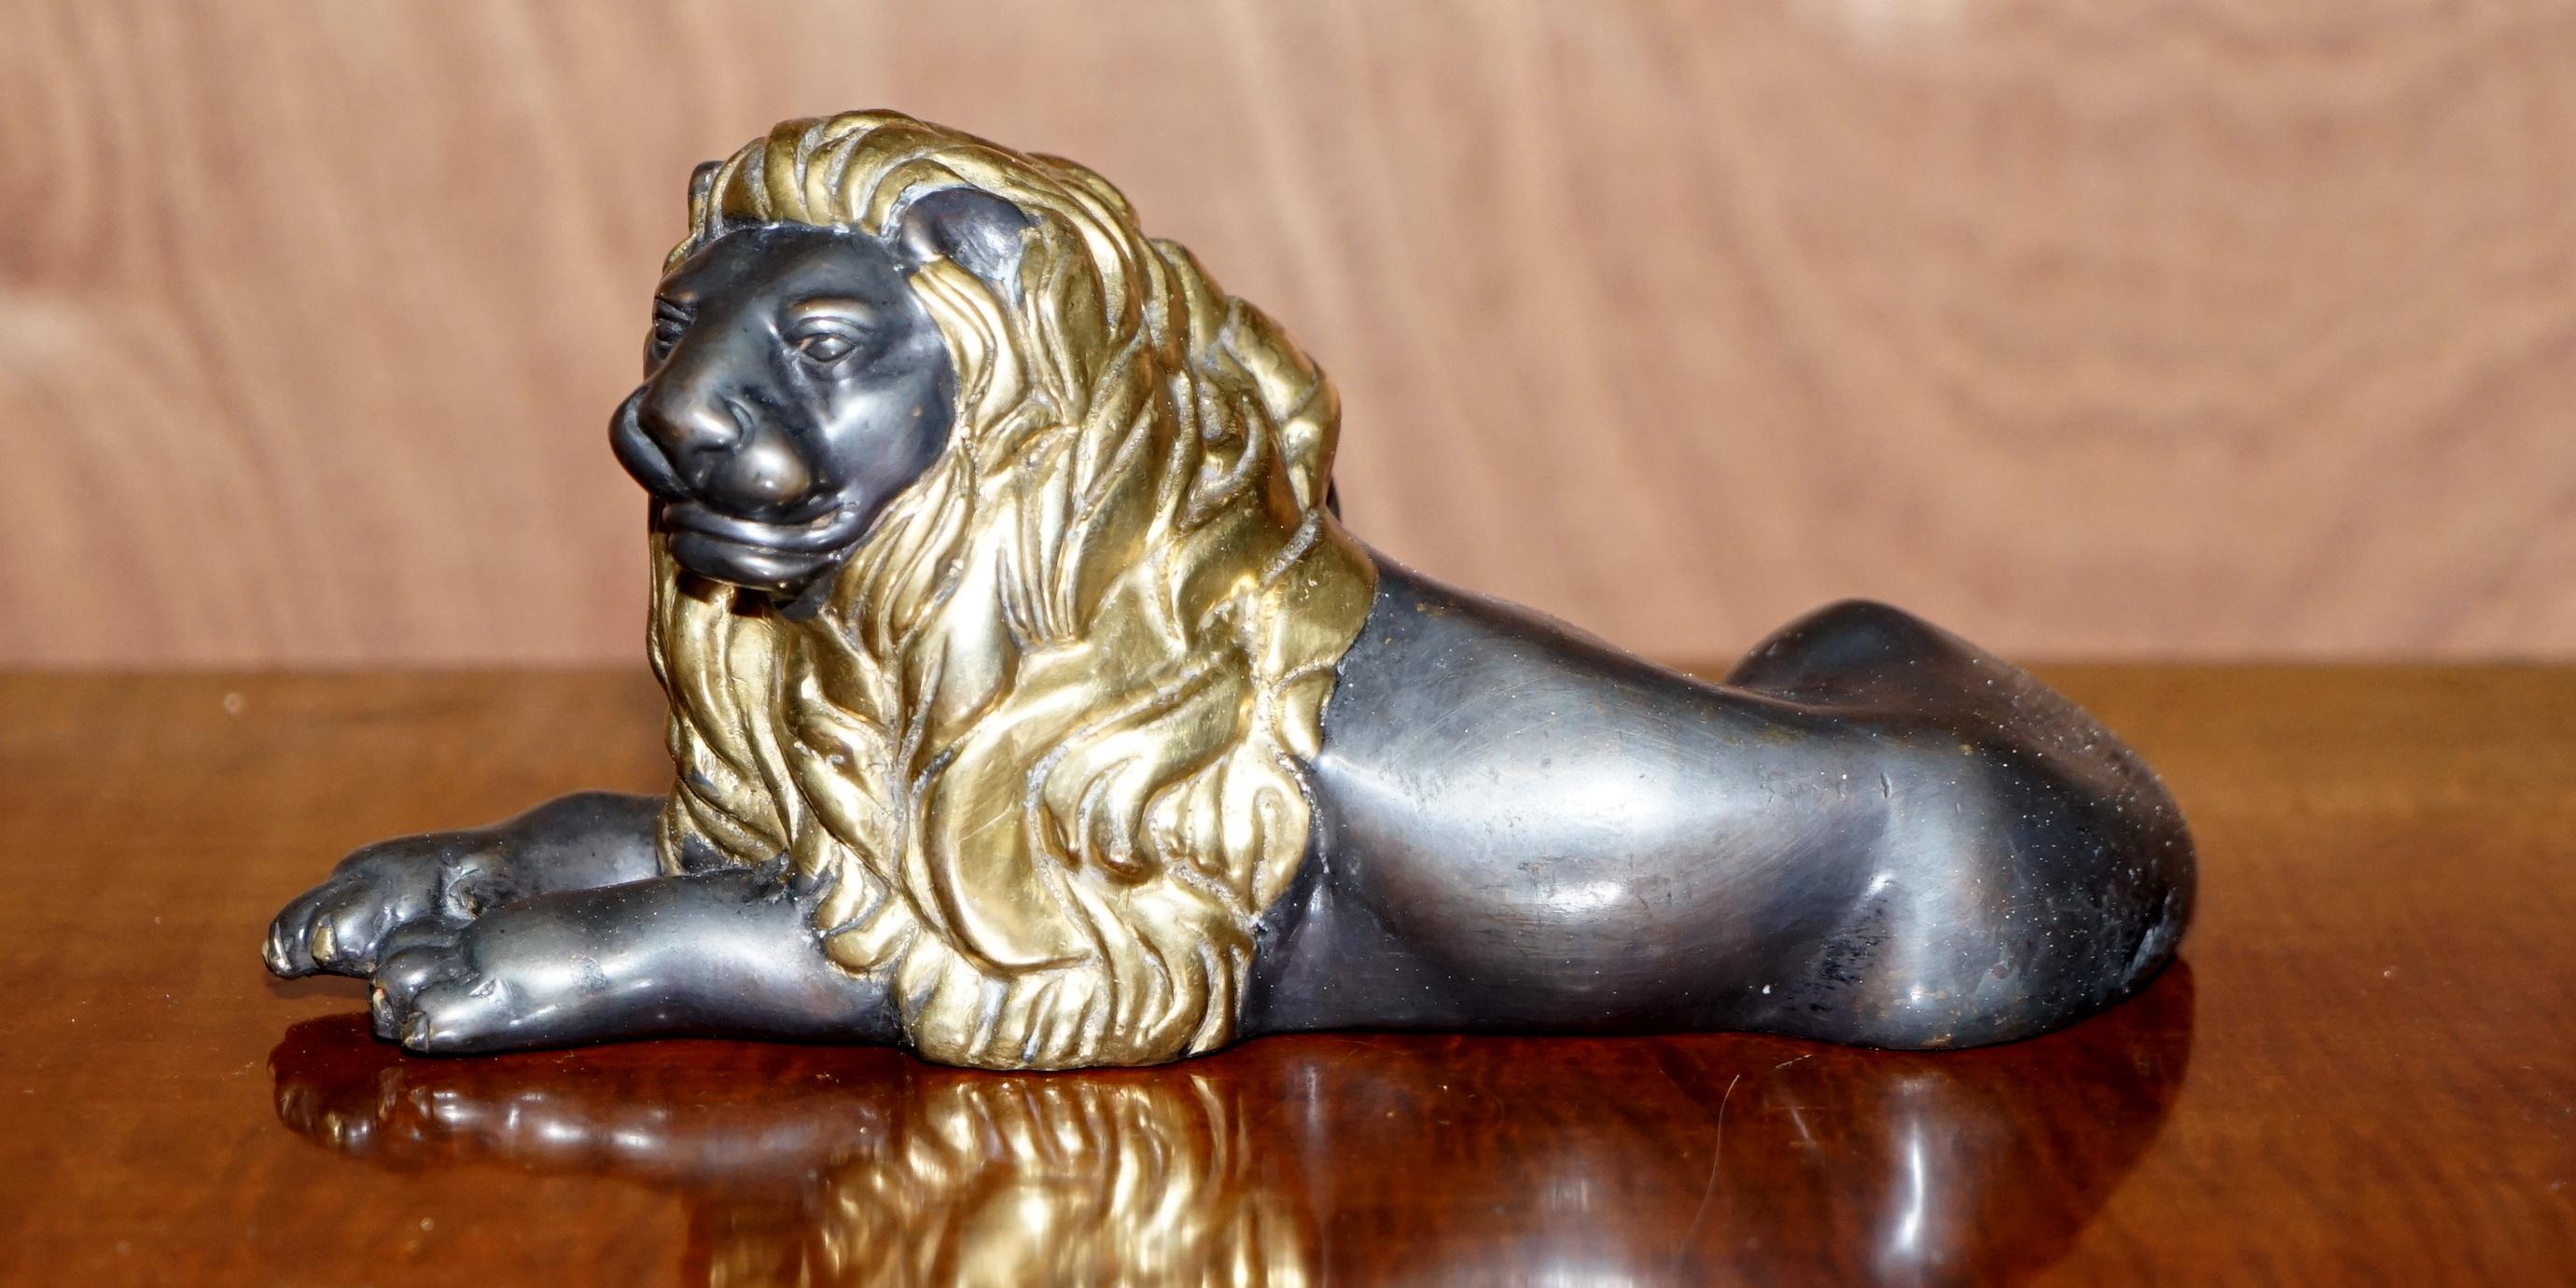 We are delighted to offer this stunning late 19th century Italian grand tour Recumbent Lion 

A very good looking and decorative piece that looks expensive and important in any setting

These pieces were purchased by young aristocrats who